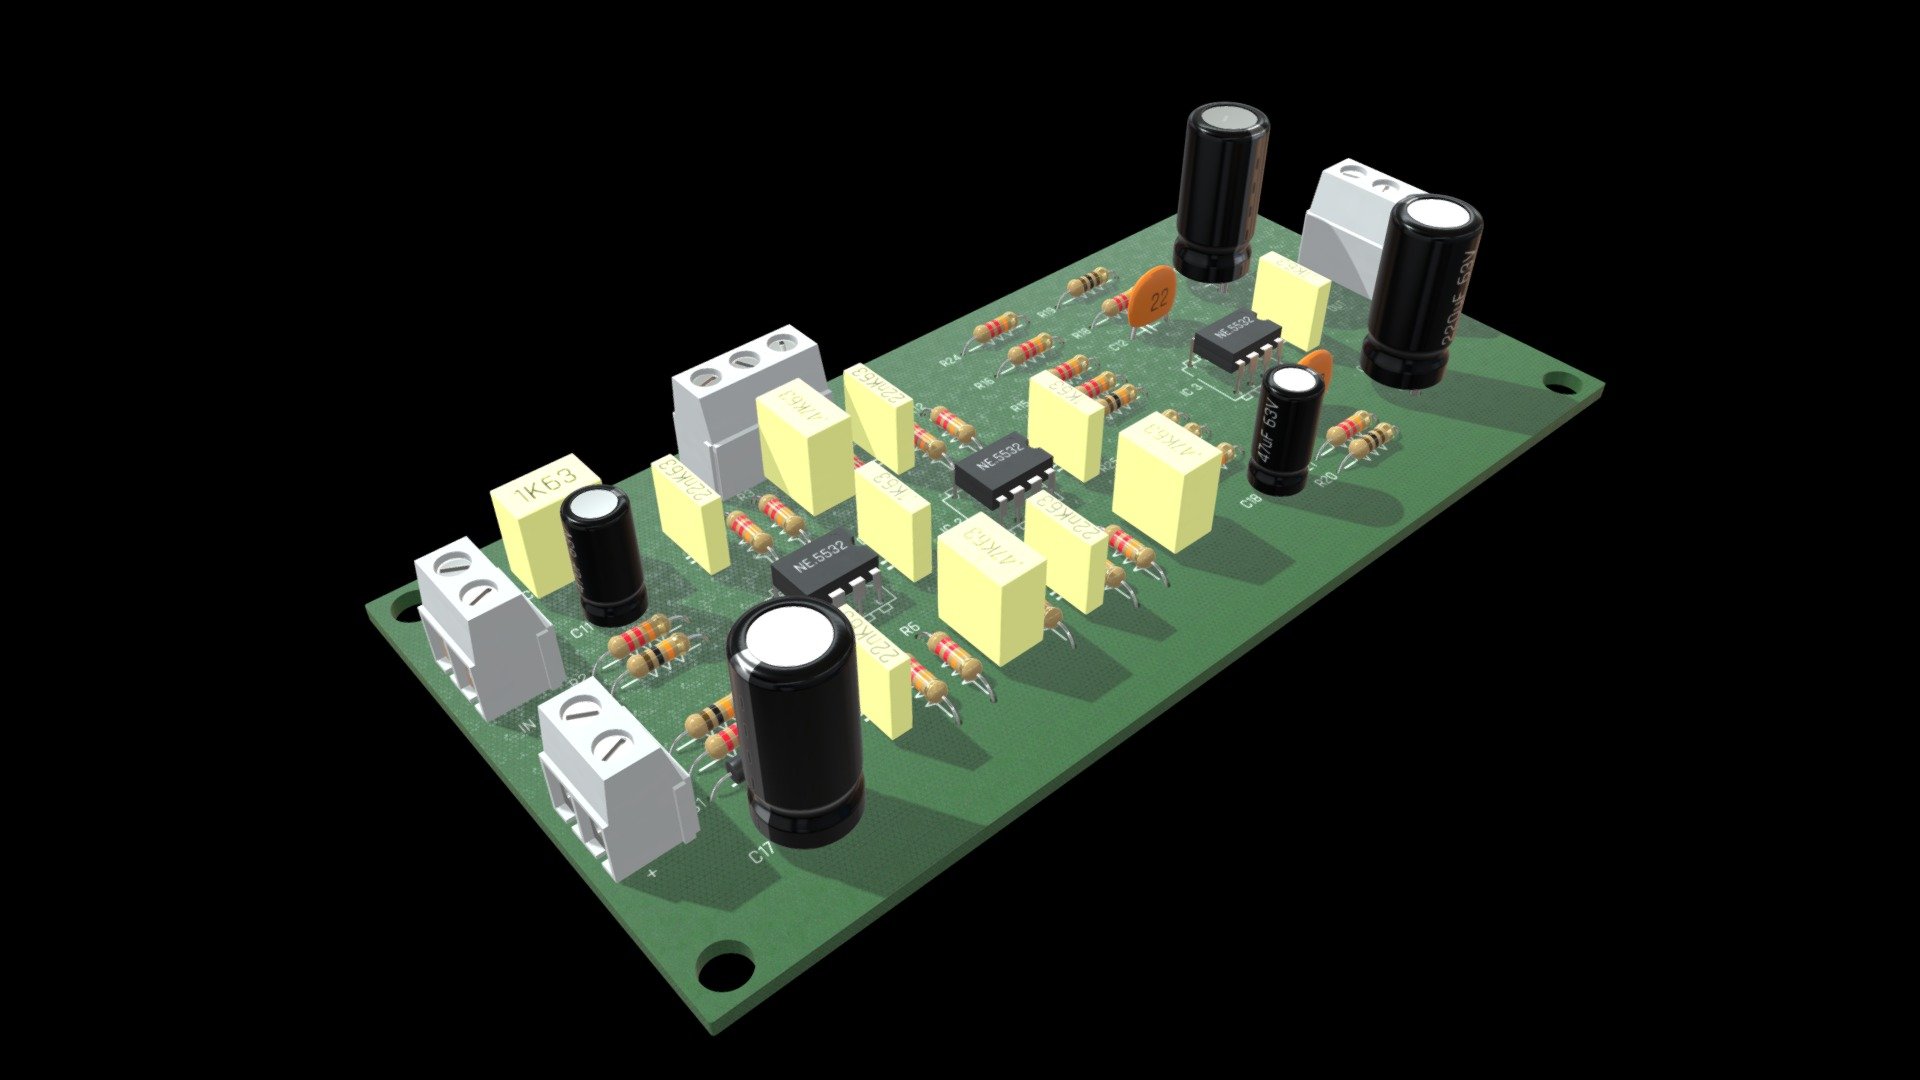 === The following description refers to the additional ZIP package provided with this model ===

Electronic circuit 3D Model, nr. 2 in my collection. 2 individual objects (board, components), each one with its own non overlapping UV Layout map, Material and PBR Textures set. Production-ready 3D Model, with PBR materials, textures, non overlapping UV Layout map provided in the package.

Quads only geometries (no tris/ngons).

Formats included: FBX, OBJ; scenes: BLEND (with Cycles / Eevee PBR Materials and Textures); other: png with Alpha.

2 Objects (meshes), 2 PBR Materials, UV unwrapped (non overlapping UV Layout map provided in the package); UV-mapped Textures.

UV Layout maps and Image Textures resolutions: 2048x2048; PBR Textures made with Substance Painter.

Polygonal, QUADS ONLY (no tris/ngons); 285710 vertices, 282676 quad faces (565352 tris).

Real world dimensions; scene scale units: cm in Blender 3.1 (that is: Metric with 0.01 scale).

Uniform scale object (scale applied in Blender 3.1) 3d model